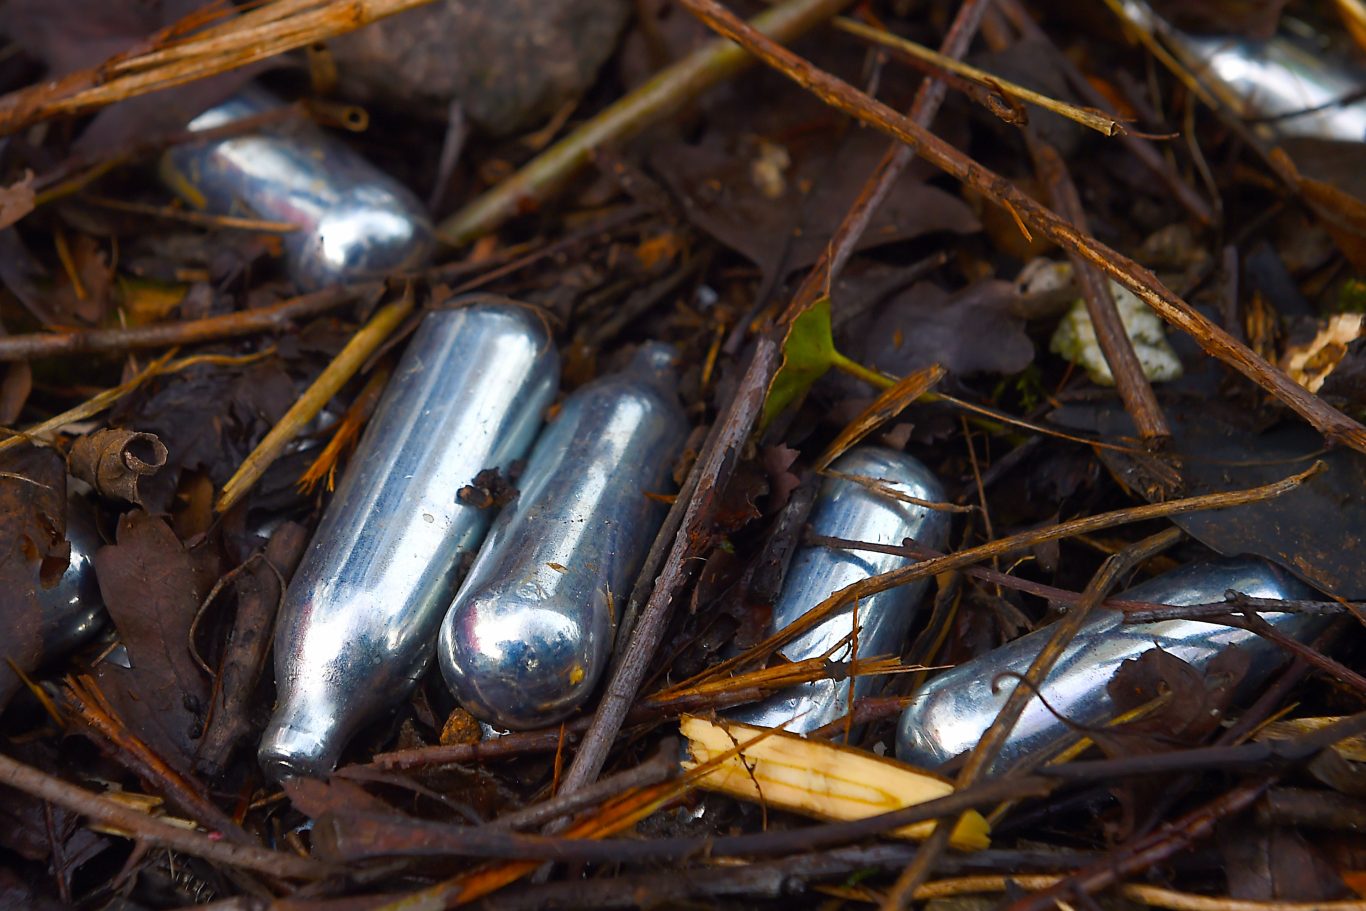 Discarded nitrous oxide canisters (PA)